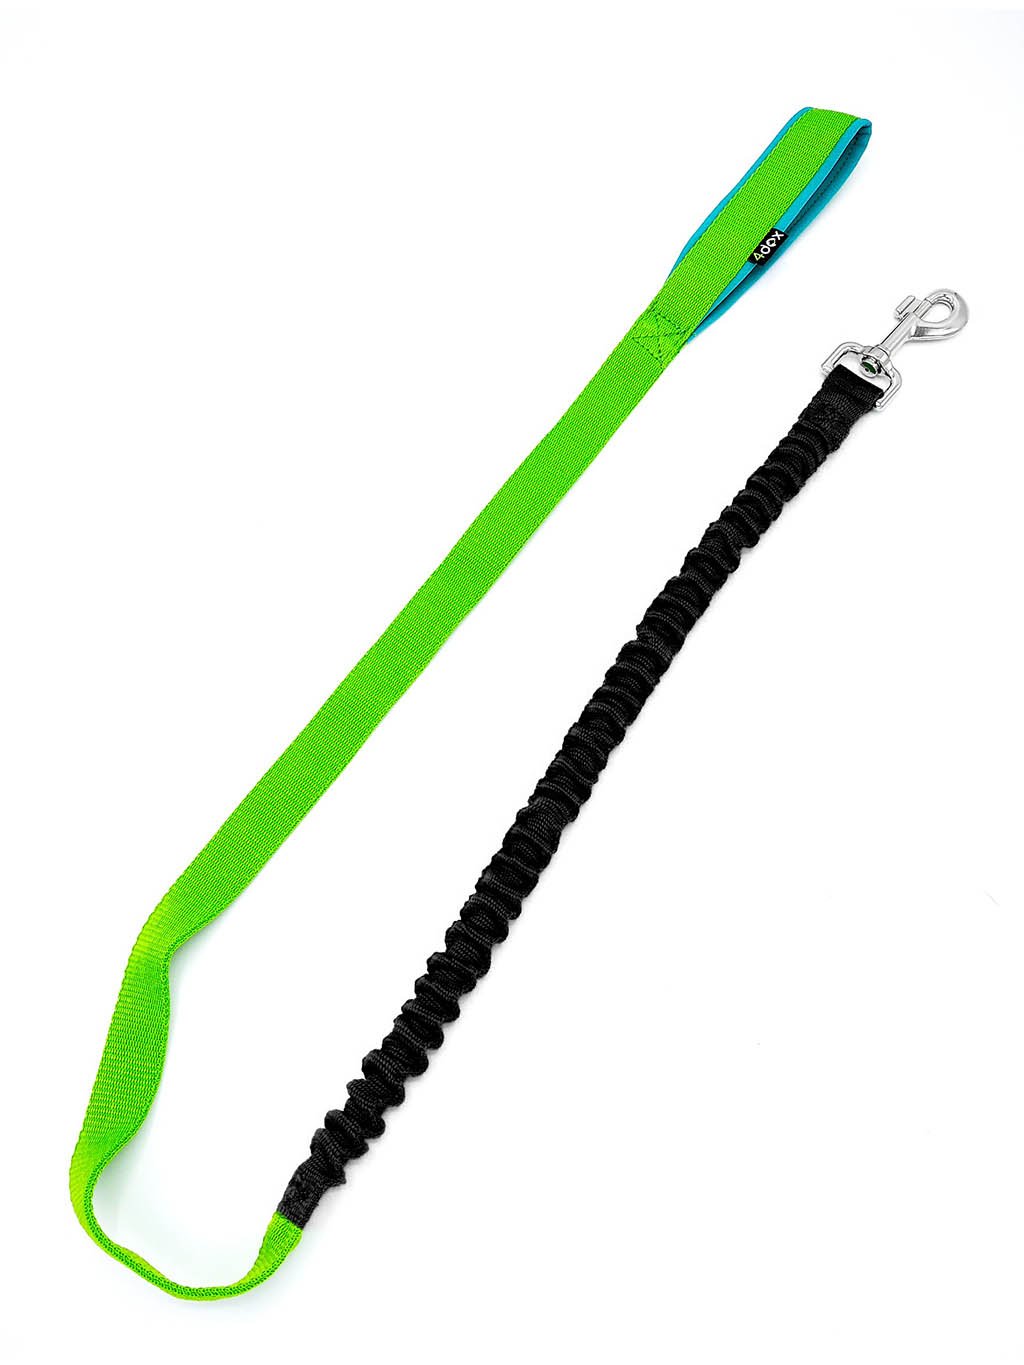 Guide with shock absorber - customized leash